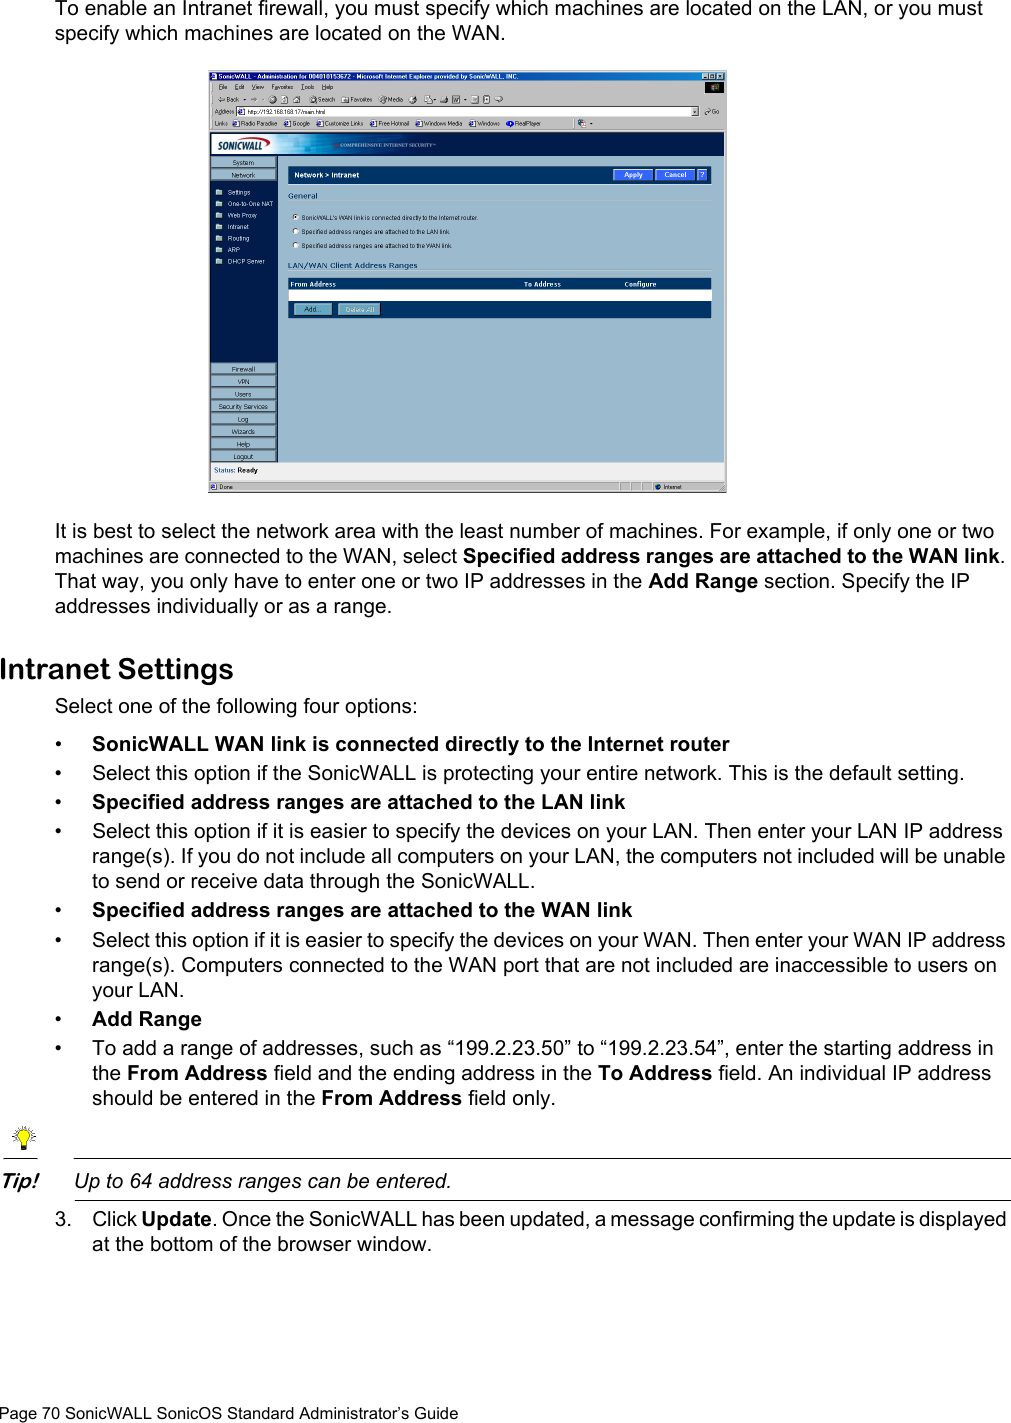 Page 70 SonicWALL SonicOS Standard Administrator’s GuideTo enable an Intranet firewall, you must specify which machines are located on the LAN, or you must specify which machines are located on the WAN.It is best to select the network area with the least number of machines. For example, if only one or two machines are connected to the WAN, select Specified address ranges are attached to the WAN link. That way, you only have to enter one or two IP addresses in the Add Range section. Specify the IP addresses individually or as a range. Intranet SettingsSelect one of the following four options: •SonicWALL WAN link is connected directly to the Internet router • Select this option if the SonicWALL is protecting your entire network. This is the default setting.•Specified address ranges are attached to the LAN link • Select this option if it is easier to specify the devices on your LAN. Then enter your LAN IP address range(s). If you do not include all computers on your LAN, the computers not included will be unable to send or receive data through the SonicWALL.•Specified address ranges are attached to the WAN link • Select this option if it is easier to specify the devices on your WAN. Then enter your WAN IP address range(s). Computers connected to the WAN port that are not included are inaccessible to users on your LAN.•Add Range • To add a range of addresses, such as “199.2.23.50” to “199.2.23.54”, enter the starting address in the From Address field and the ending address in the To Address field. An individual IP address should be entered in the From Address field only. Tip!Up to 64 address ranges can be entered.3. Click Update. Once the SonicWALL has been updated, a message confirming the update is displayed at the bottom of the browser window.